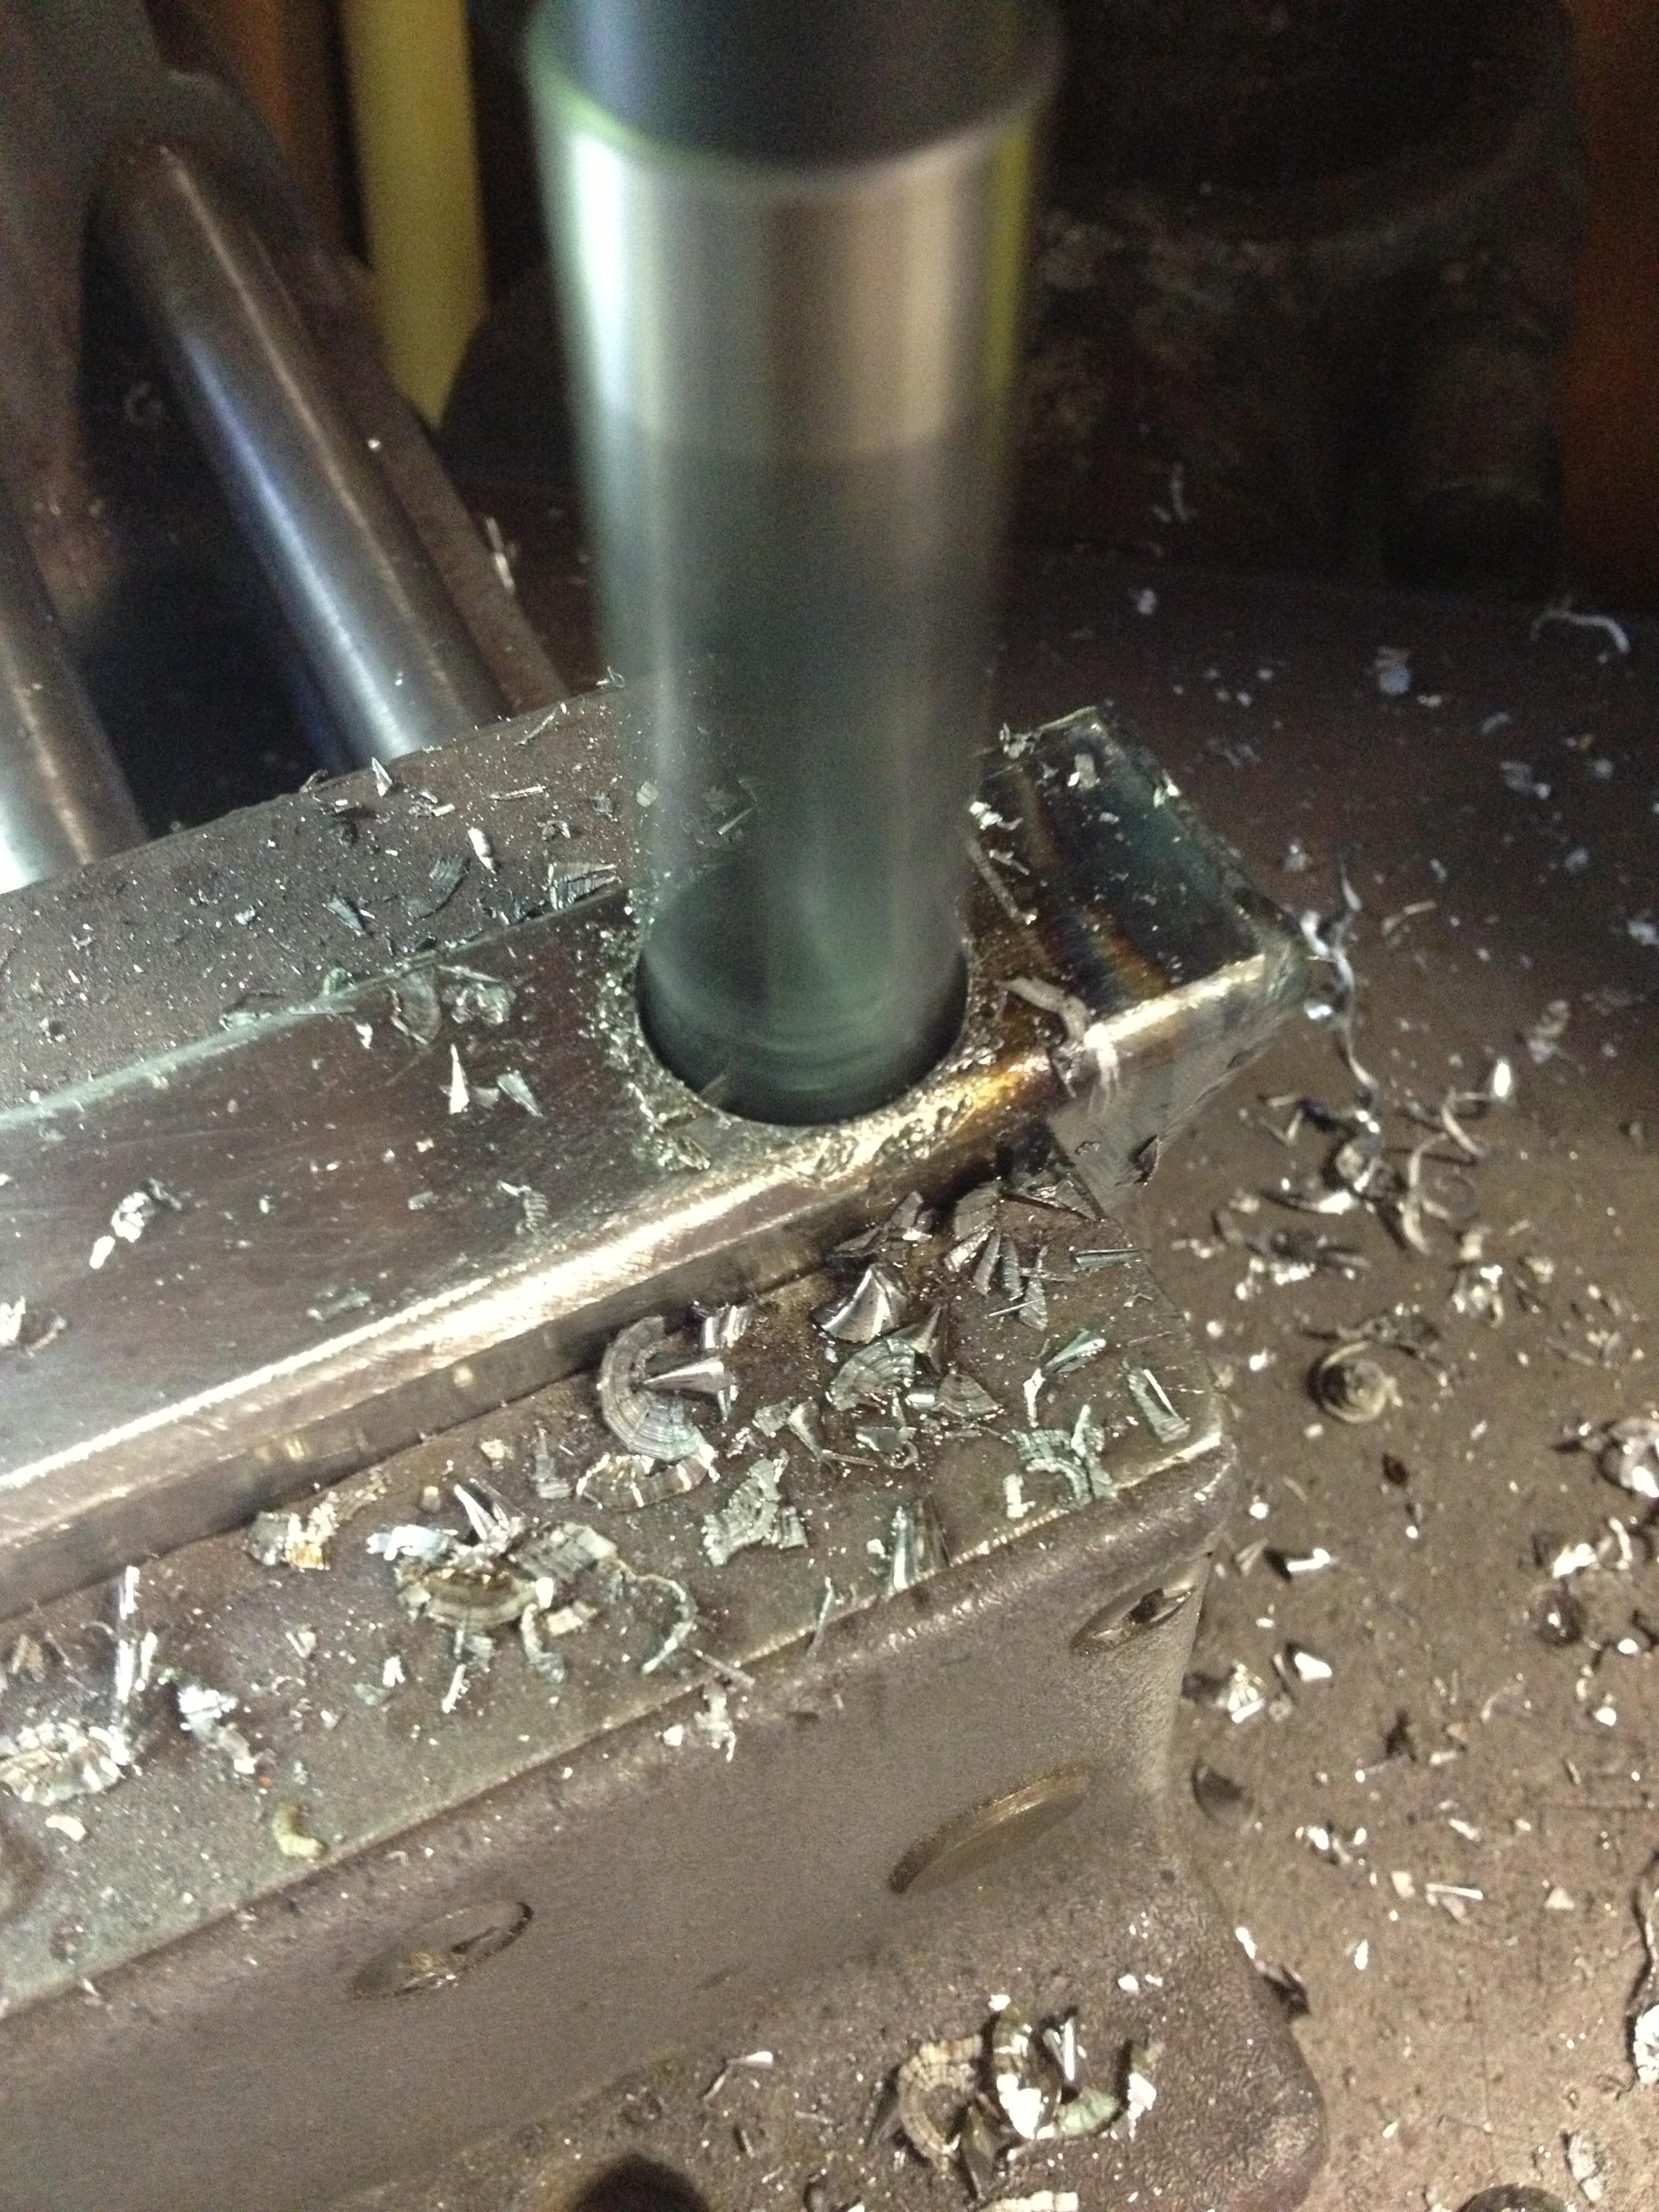 Drilling the frame